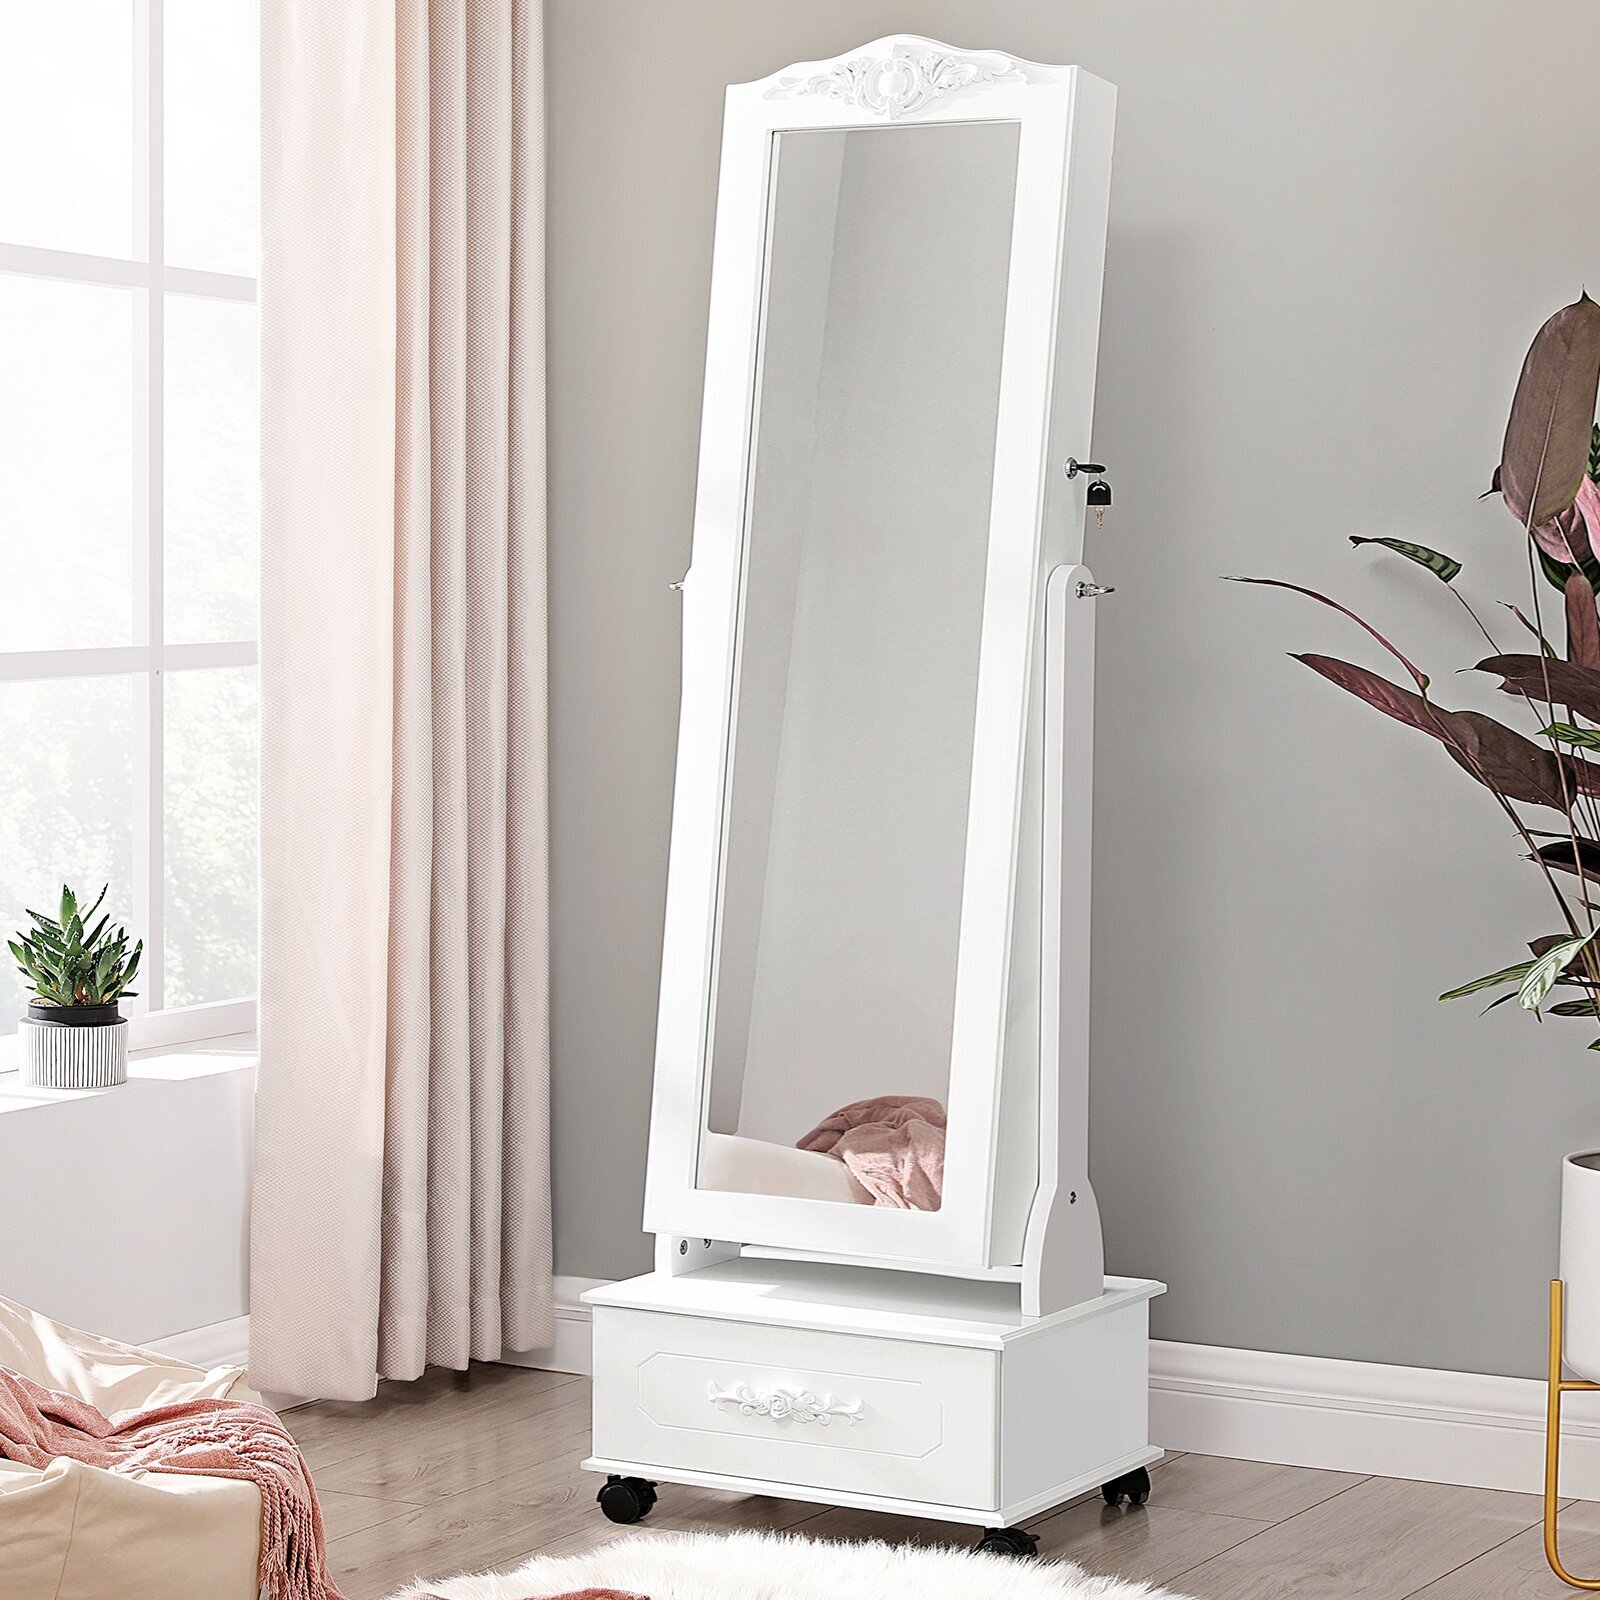 Floor Mirror With Jewelry Armoire Storage With Classic Details